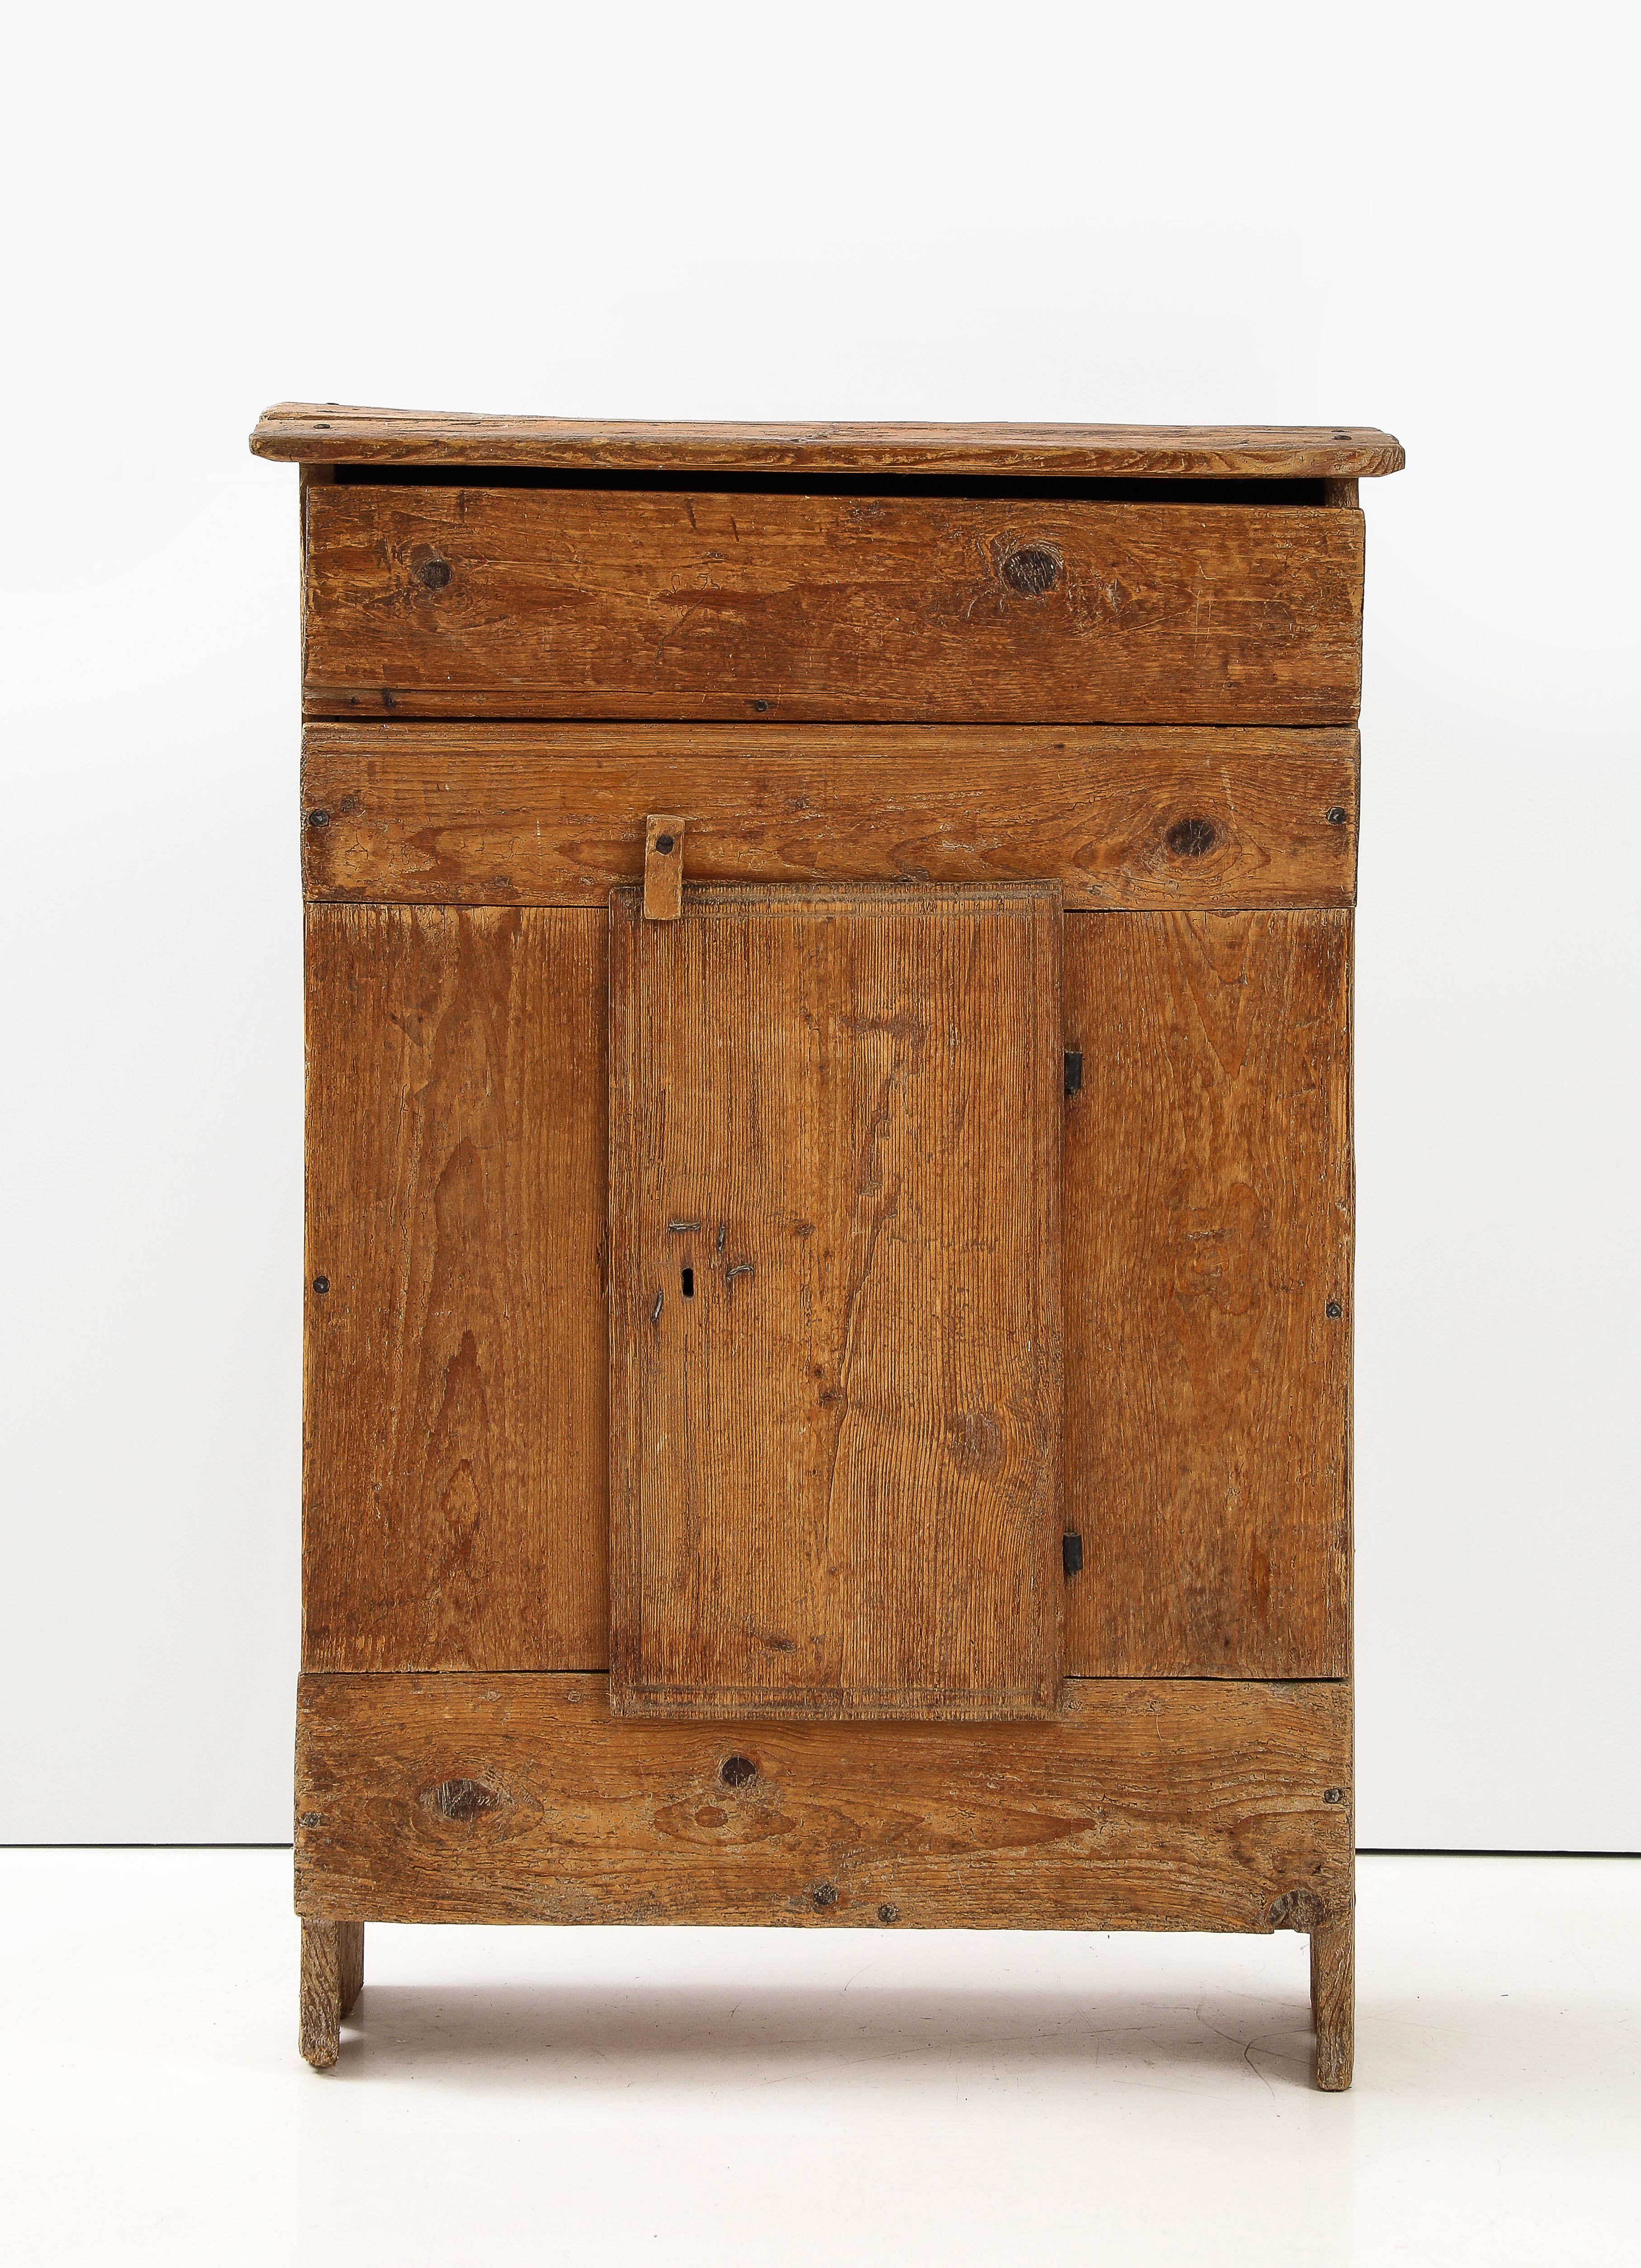 Wonderfully Charming Handmade cabinet with a Top Drawer and two Shelves from the Italian Alps, date carved into the side.